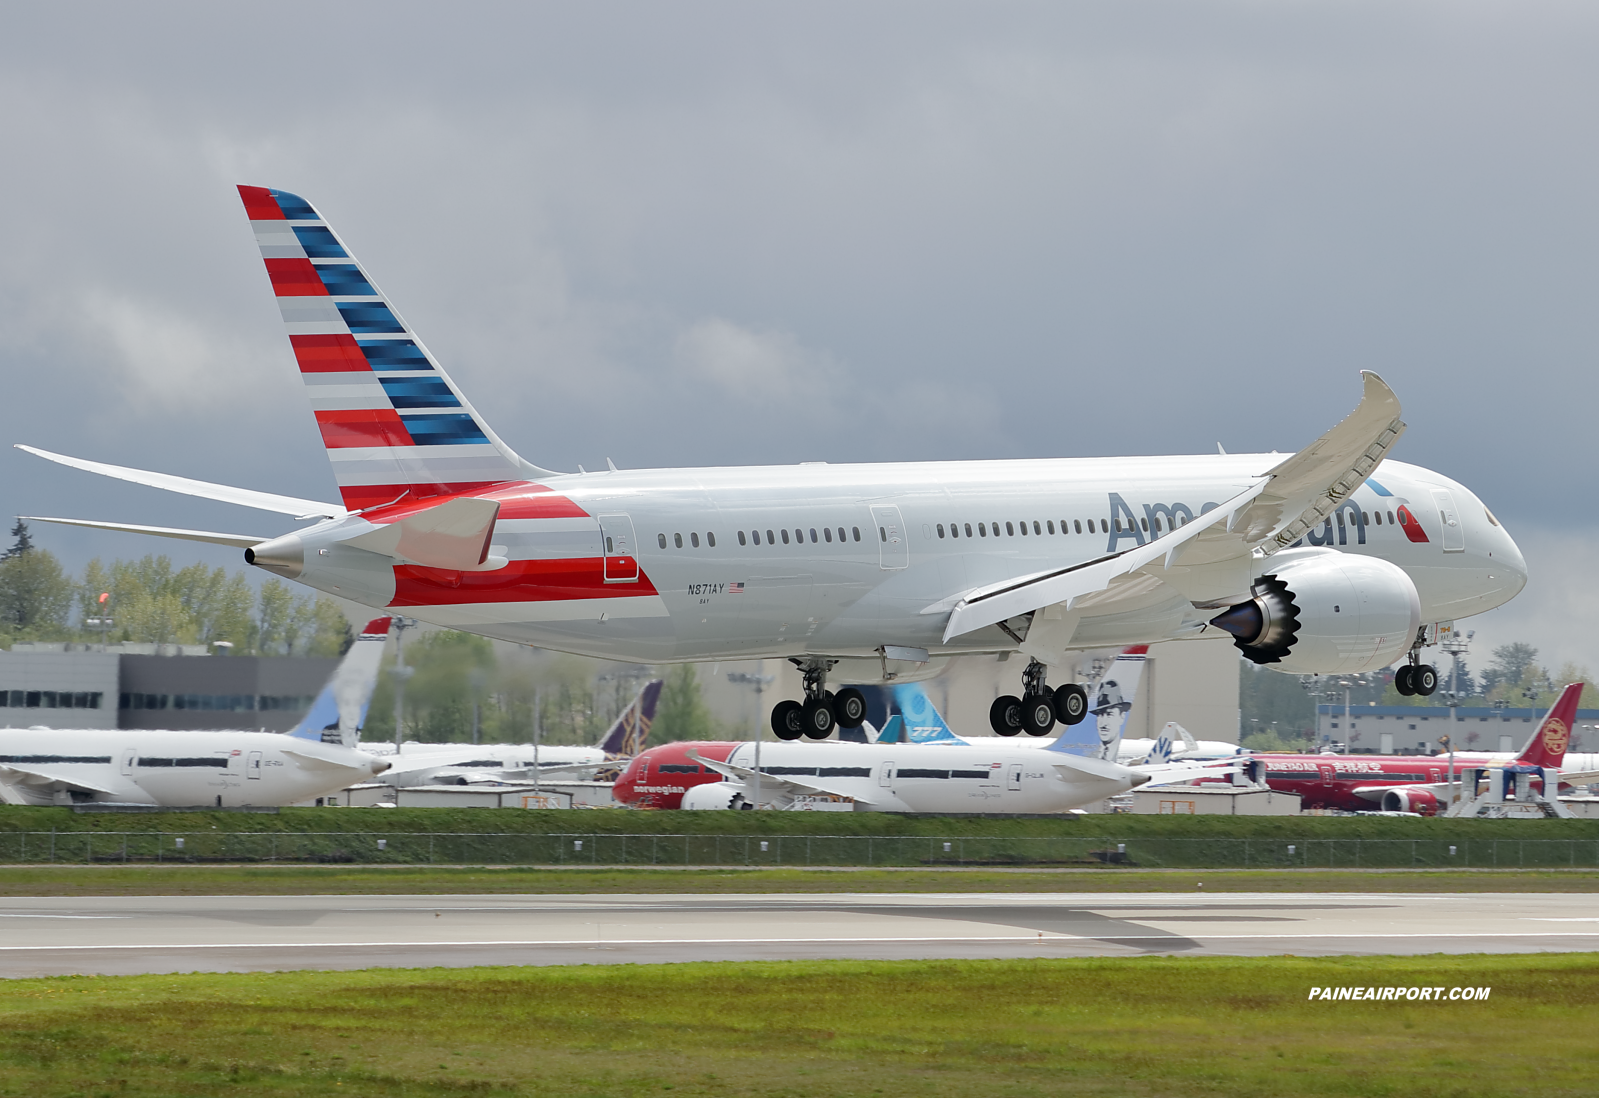 American Airlines 787-8 N871AY at Paine Field